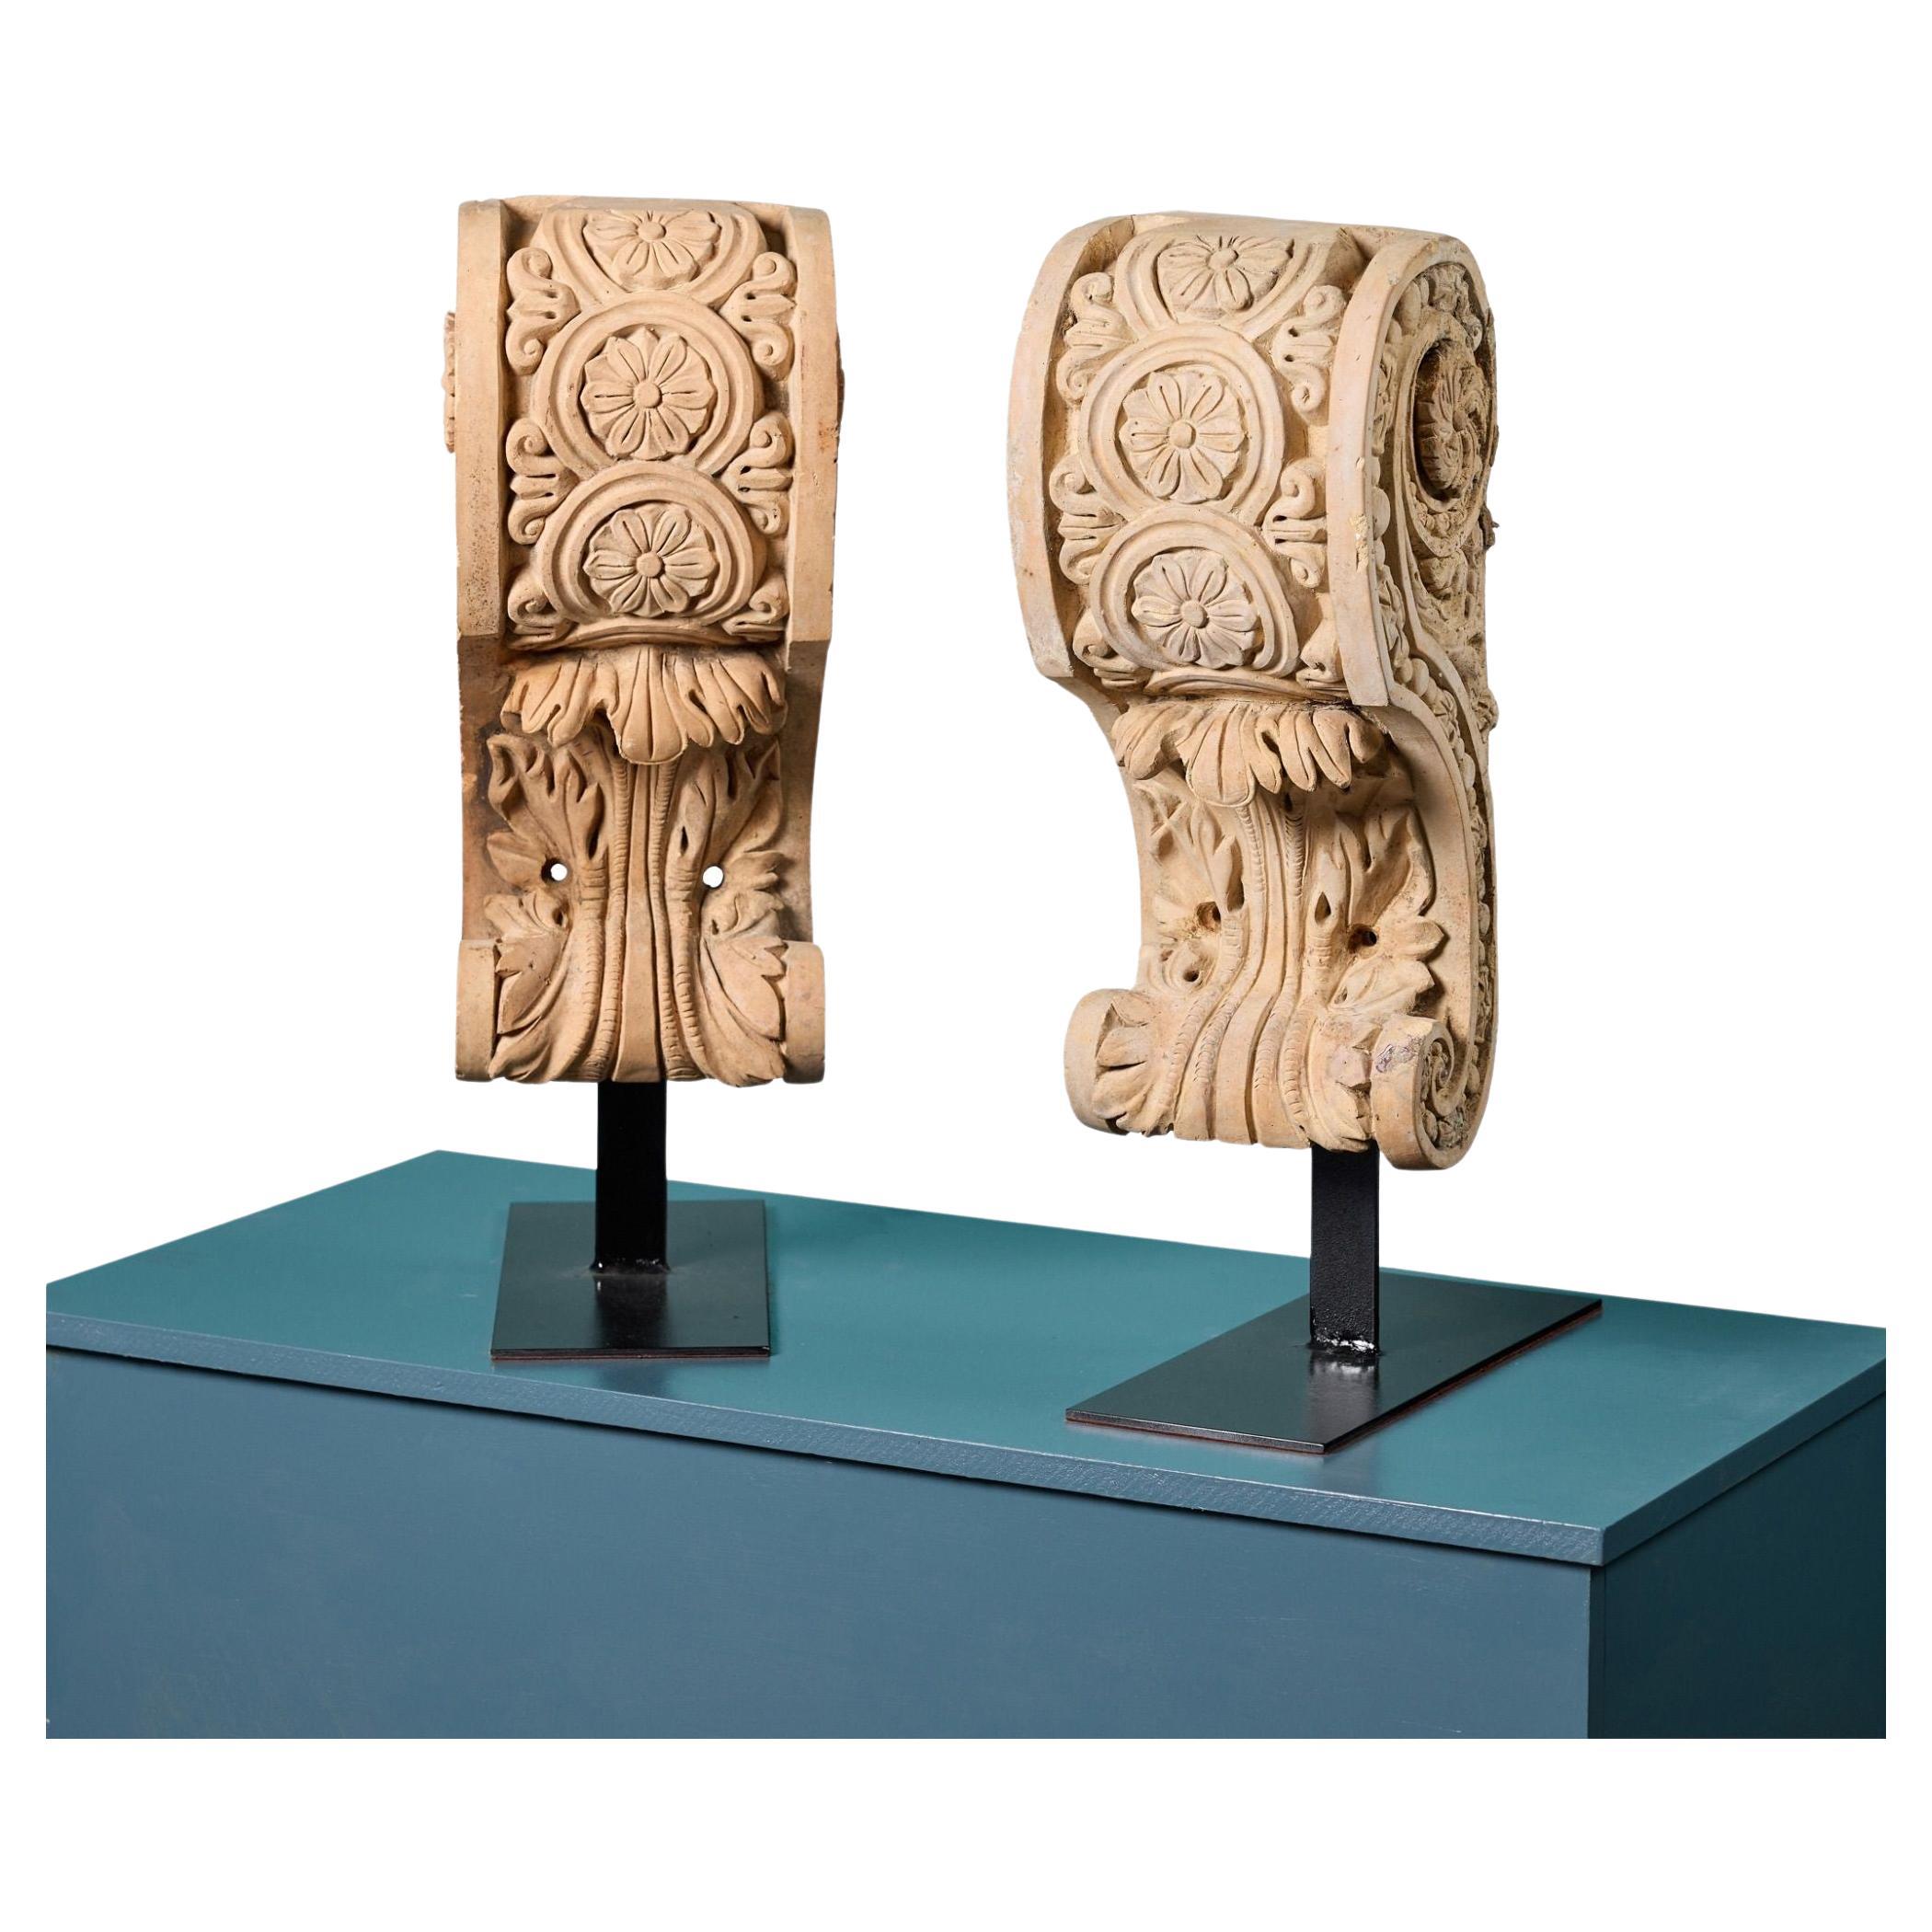 Set of 2 Ornate Terracotta Corbels Mounted on Stands For Sale